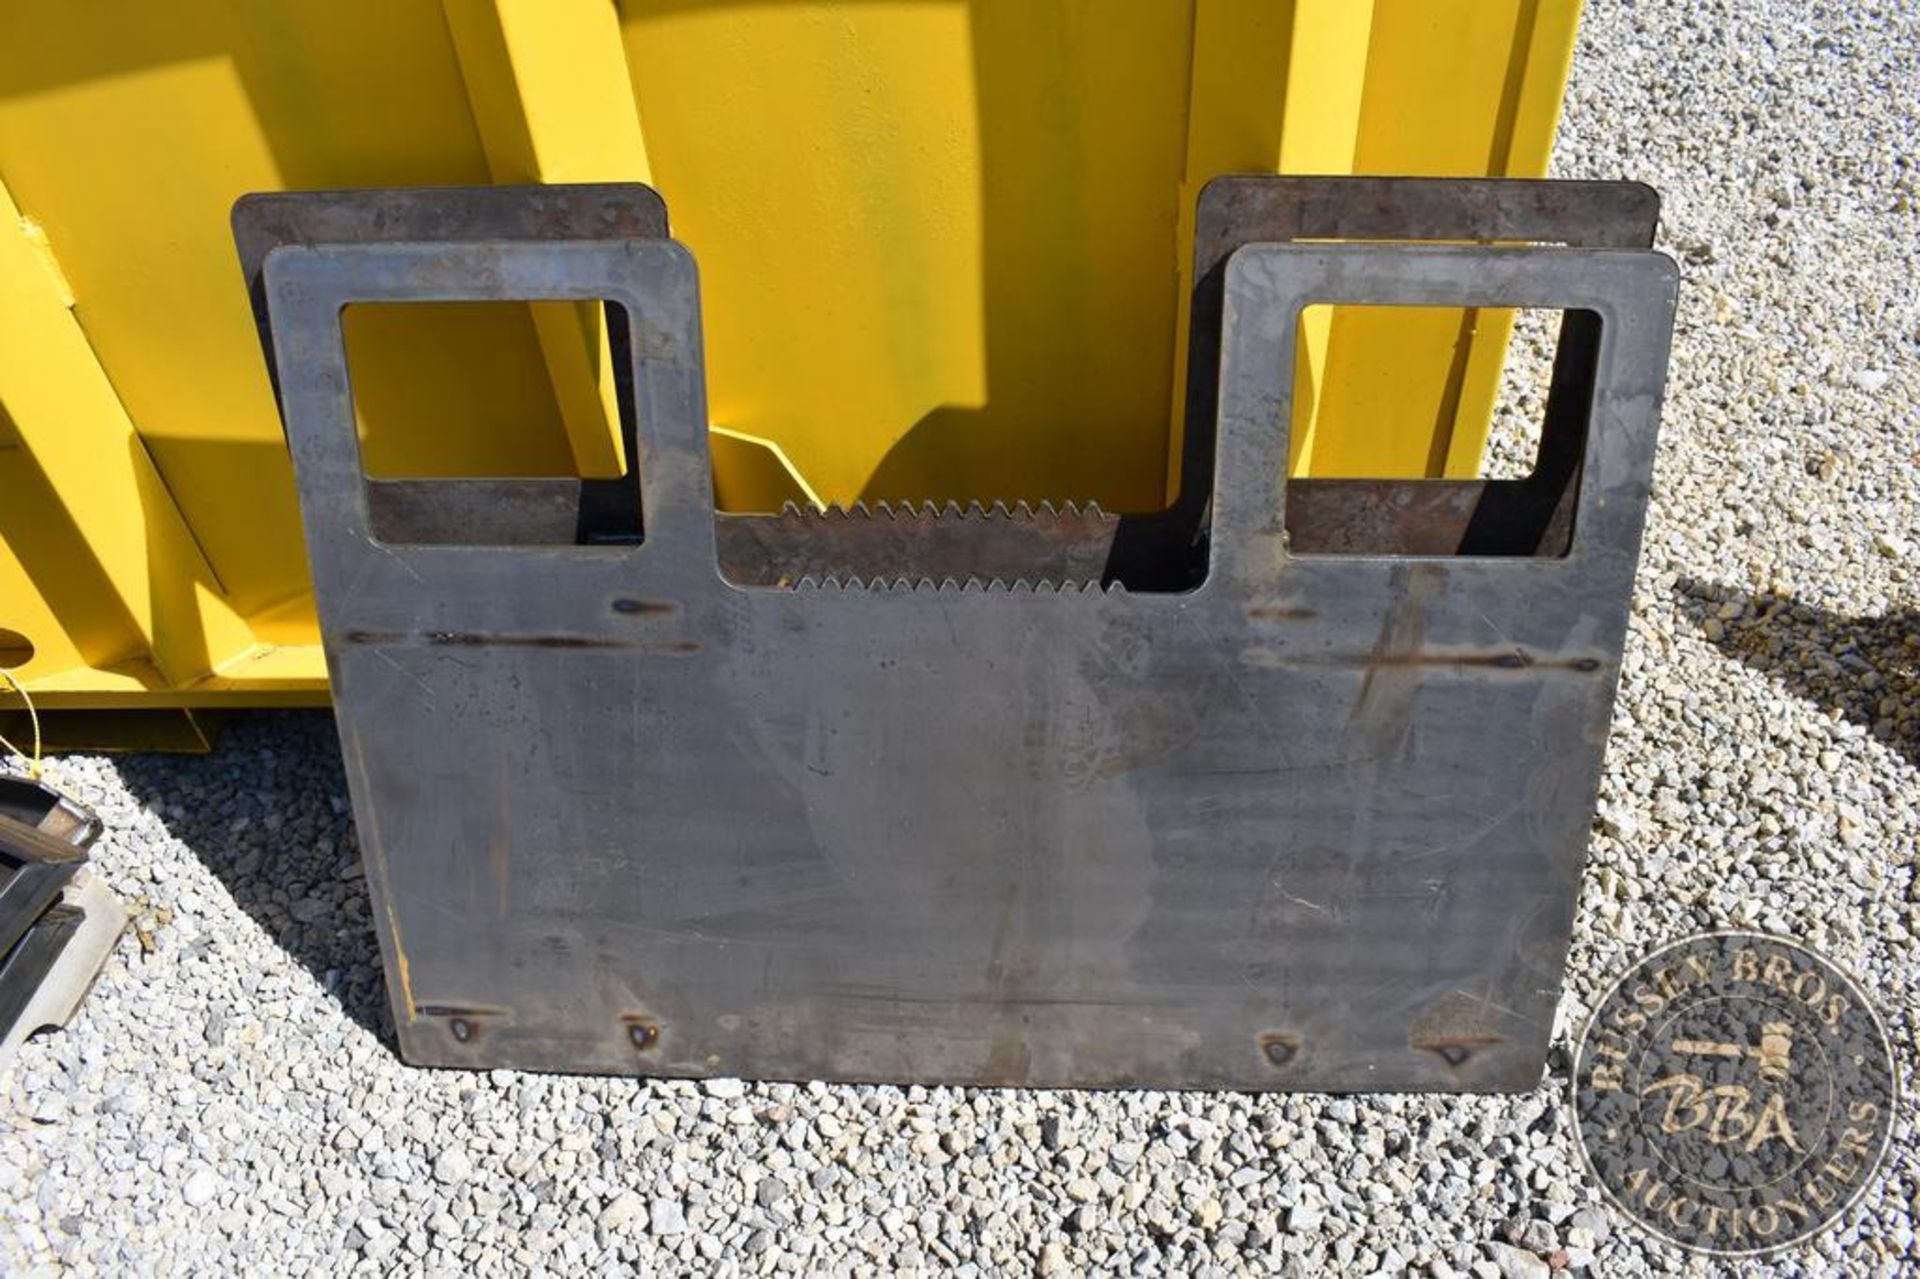 Hitch KIT CONTAINERS SKID STEER WELDABLE PLATE 27291 - Image 2 of 3